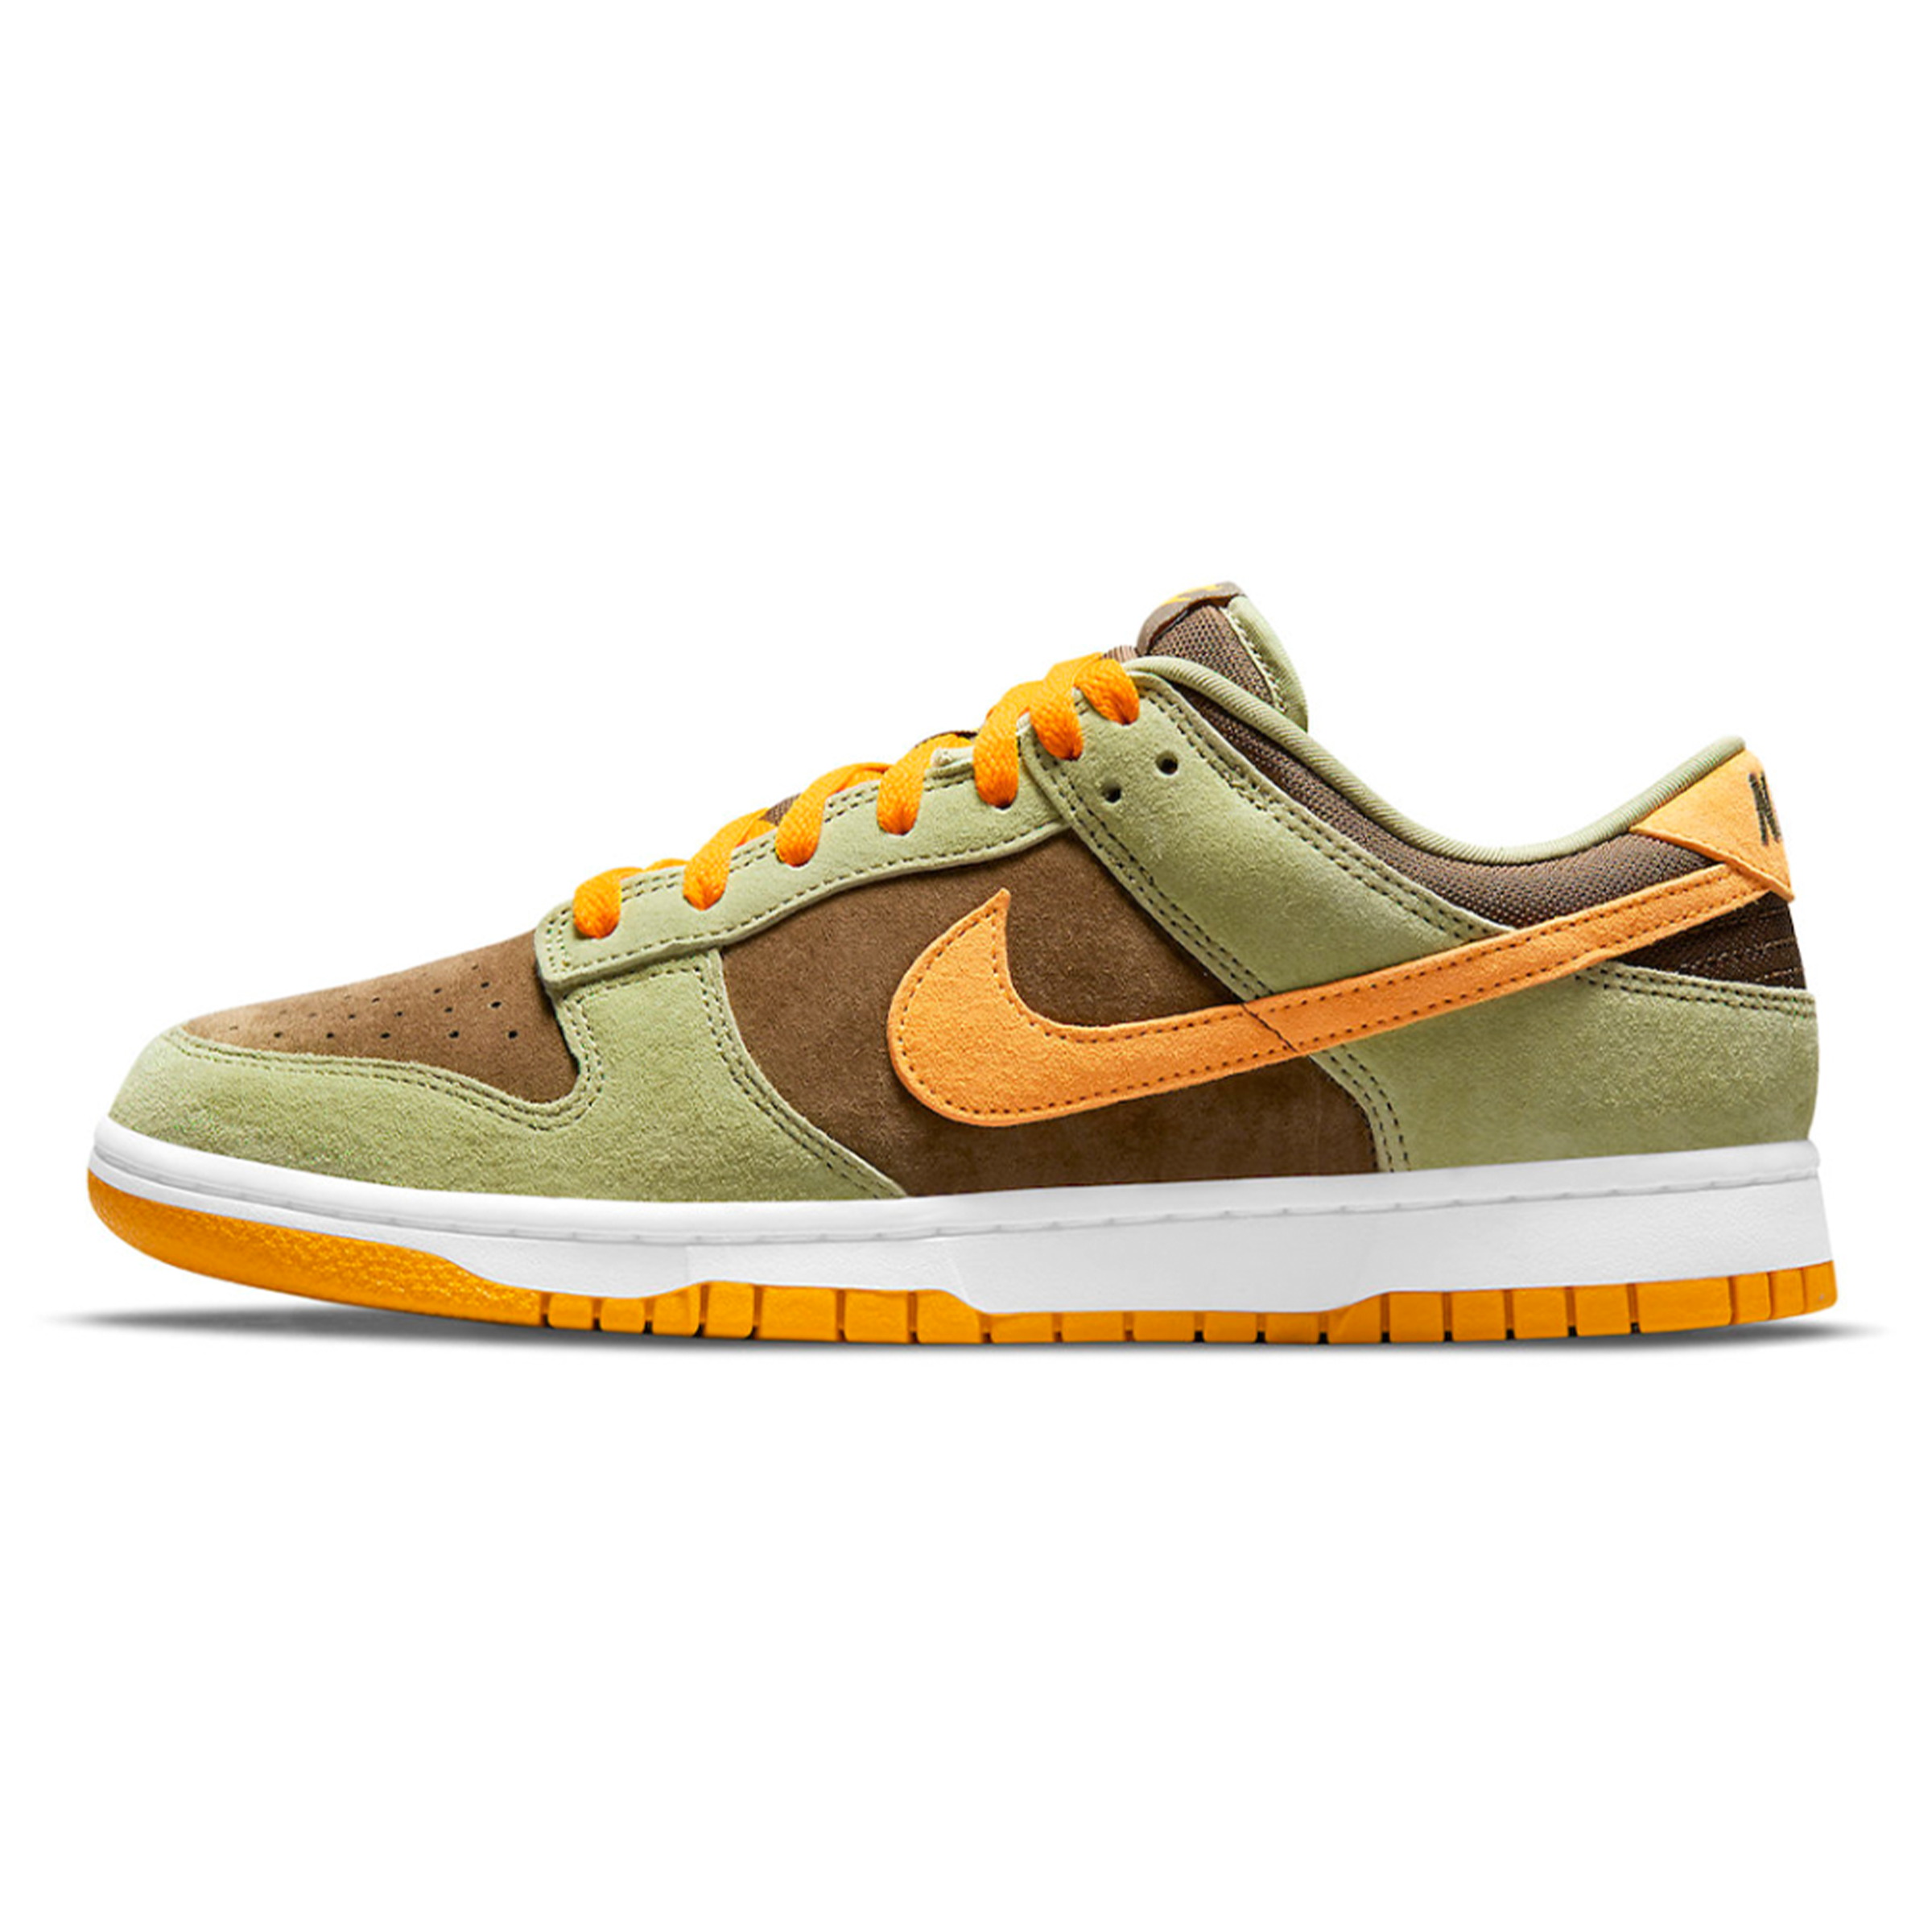 Nike Dunk Low - "Dusty Olive"